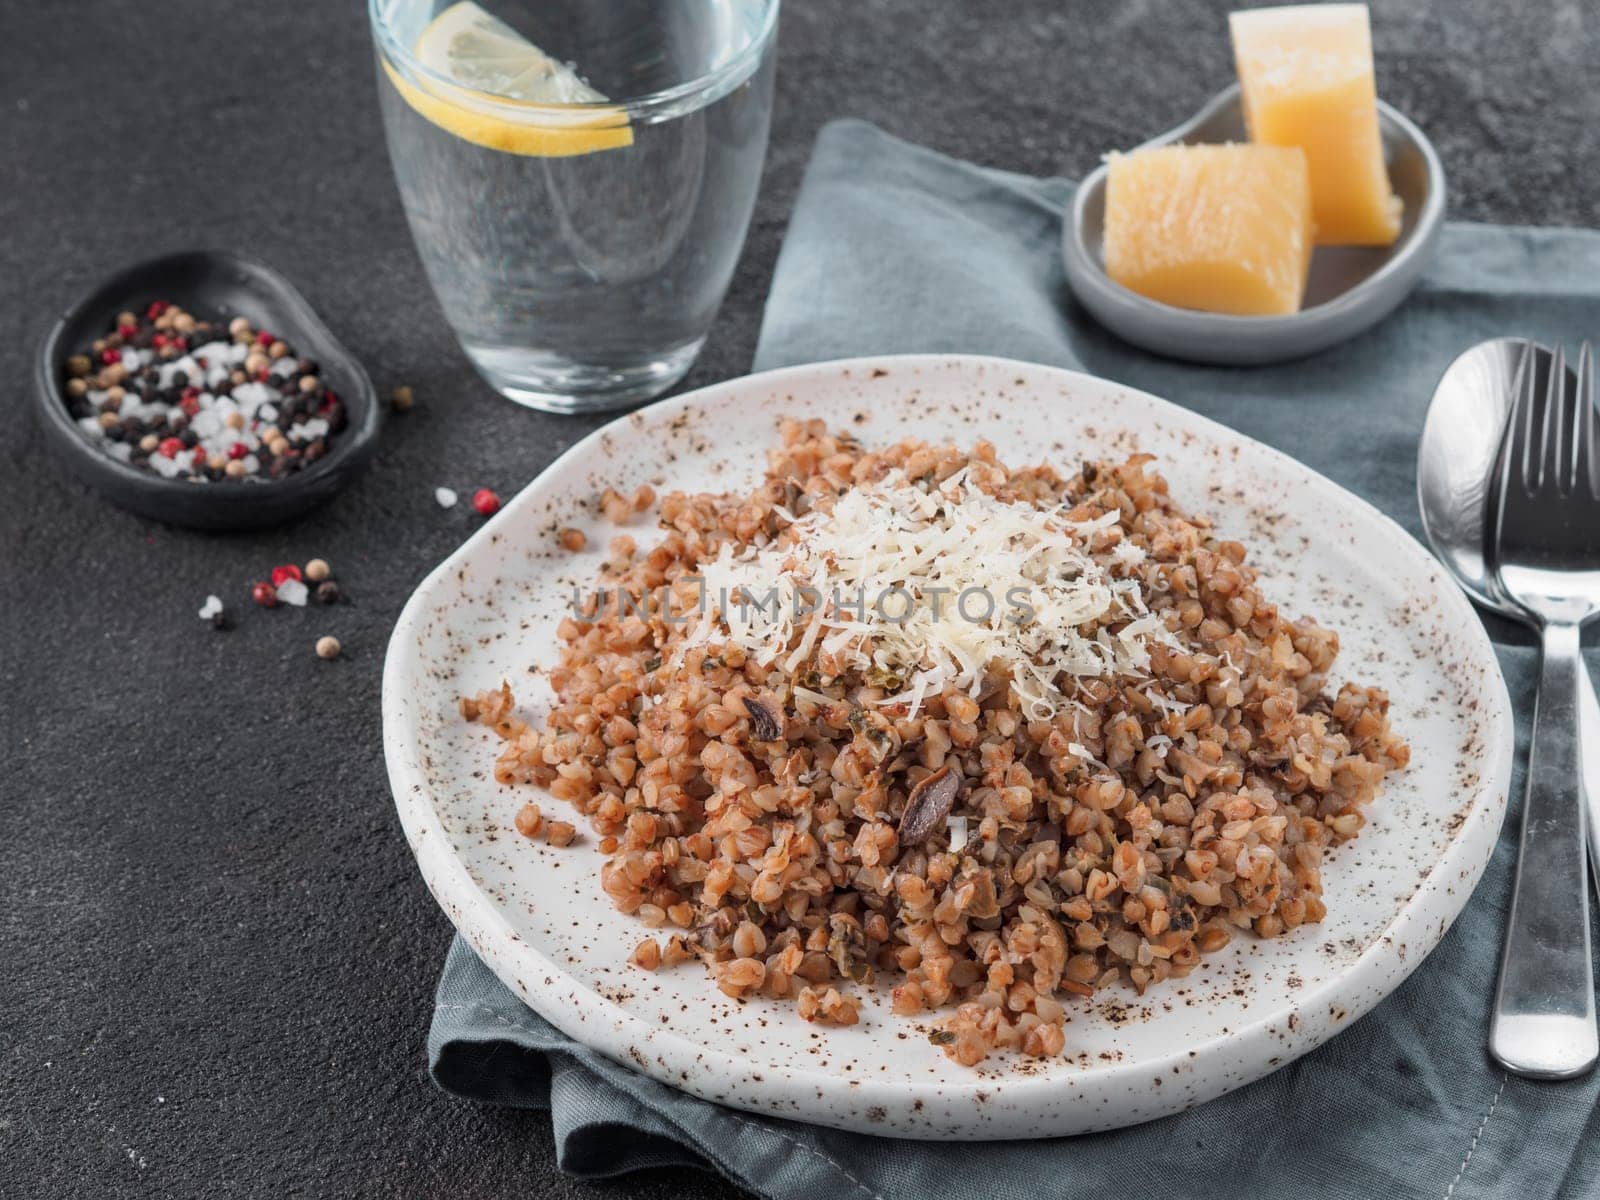 Buckwheat risotto with dried mushrooms in craft plate on black cement background. Gluten-free and vegetarian buckwheat recipe ideas. Copy space